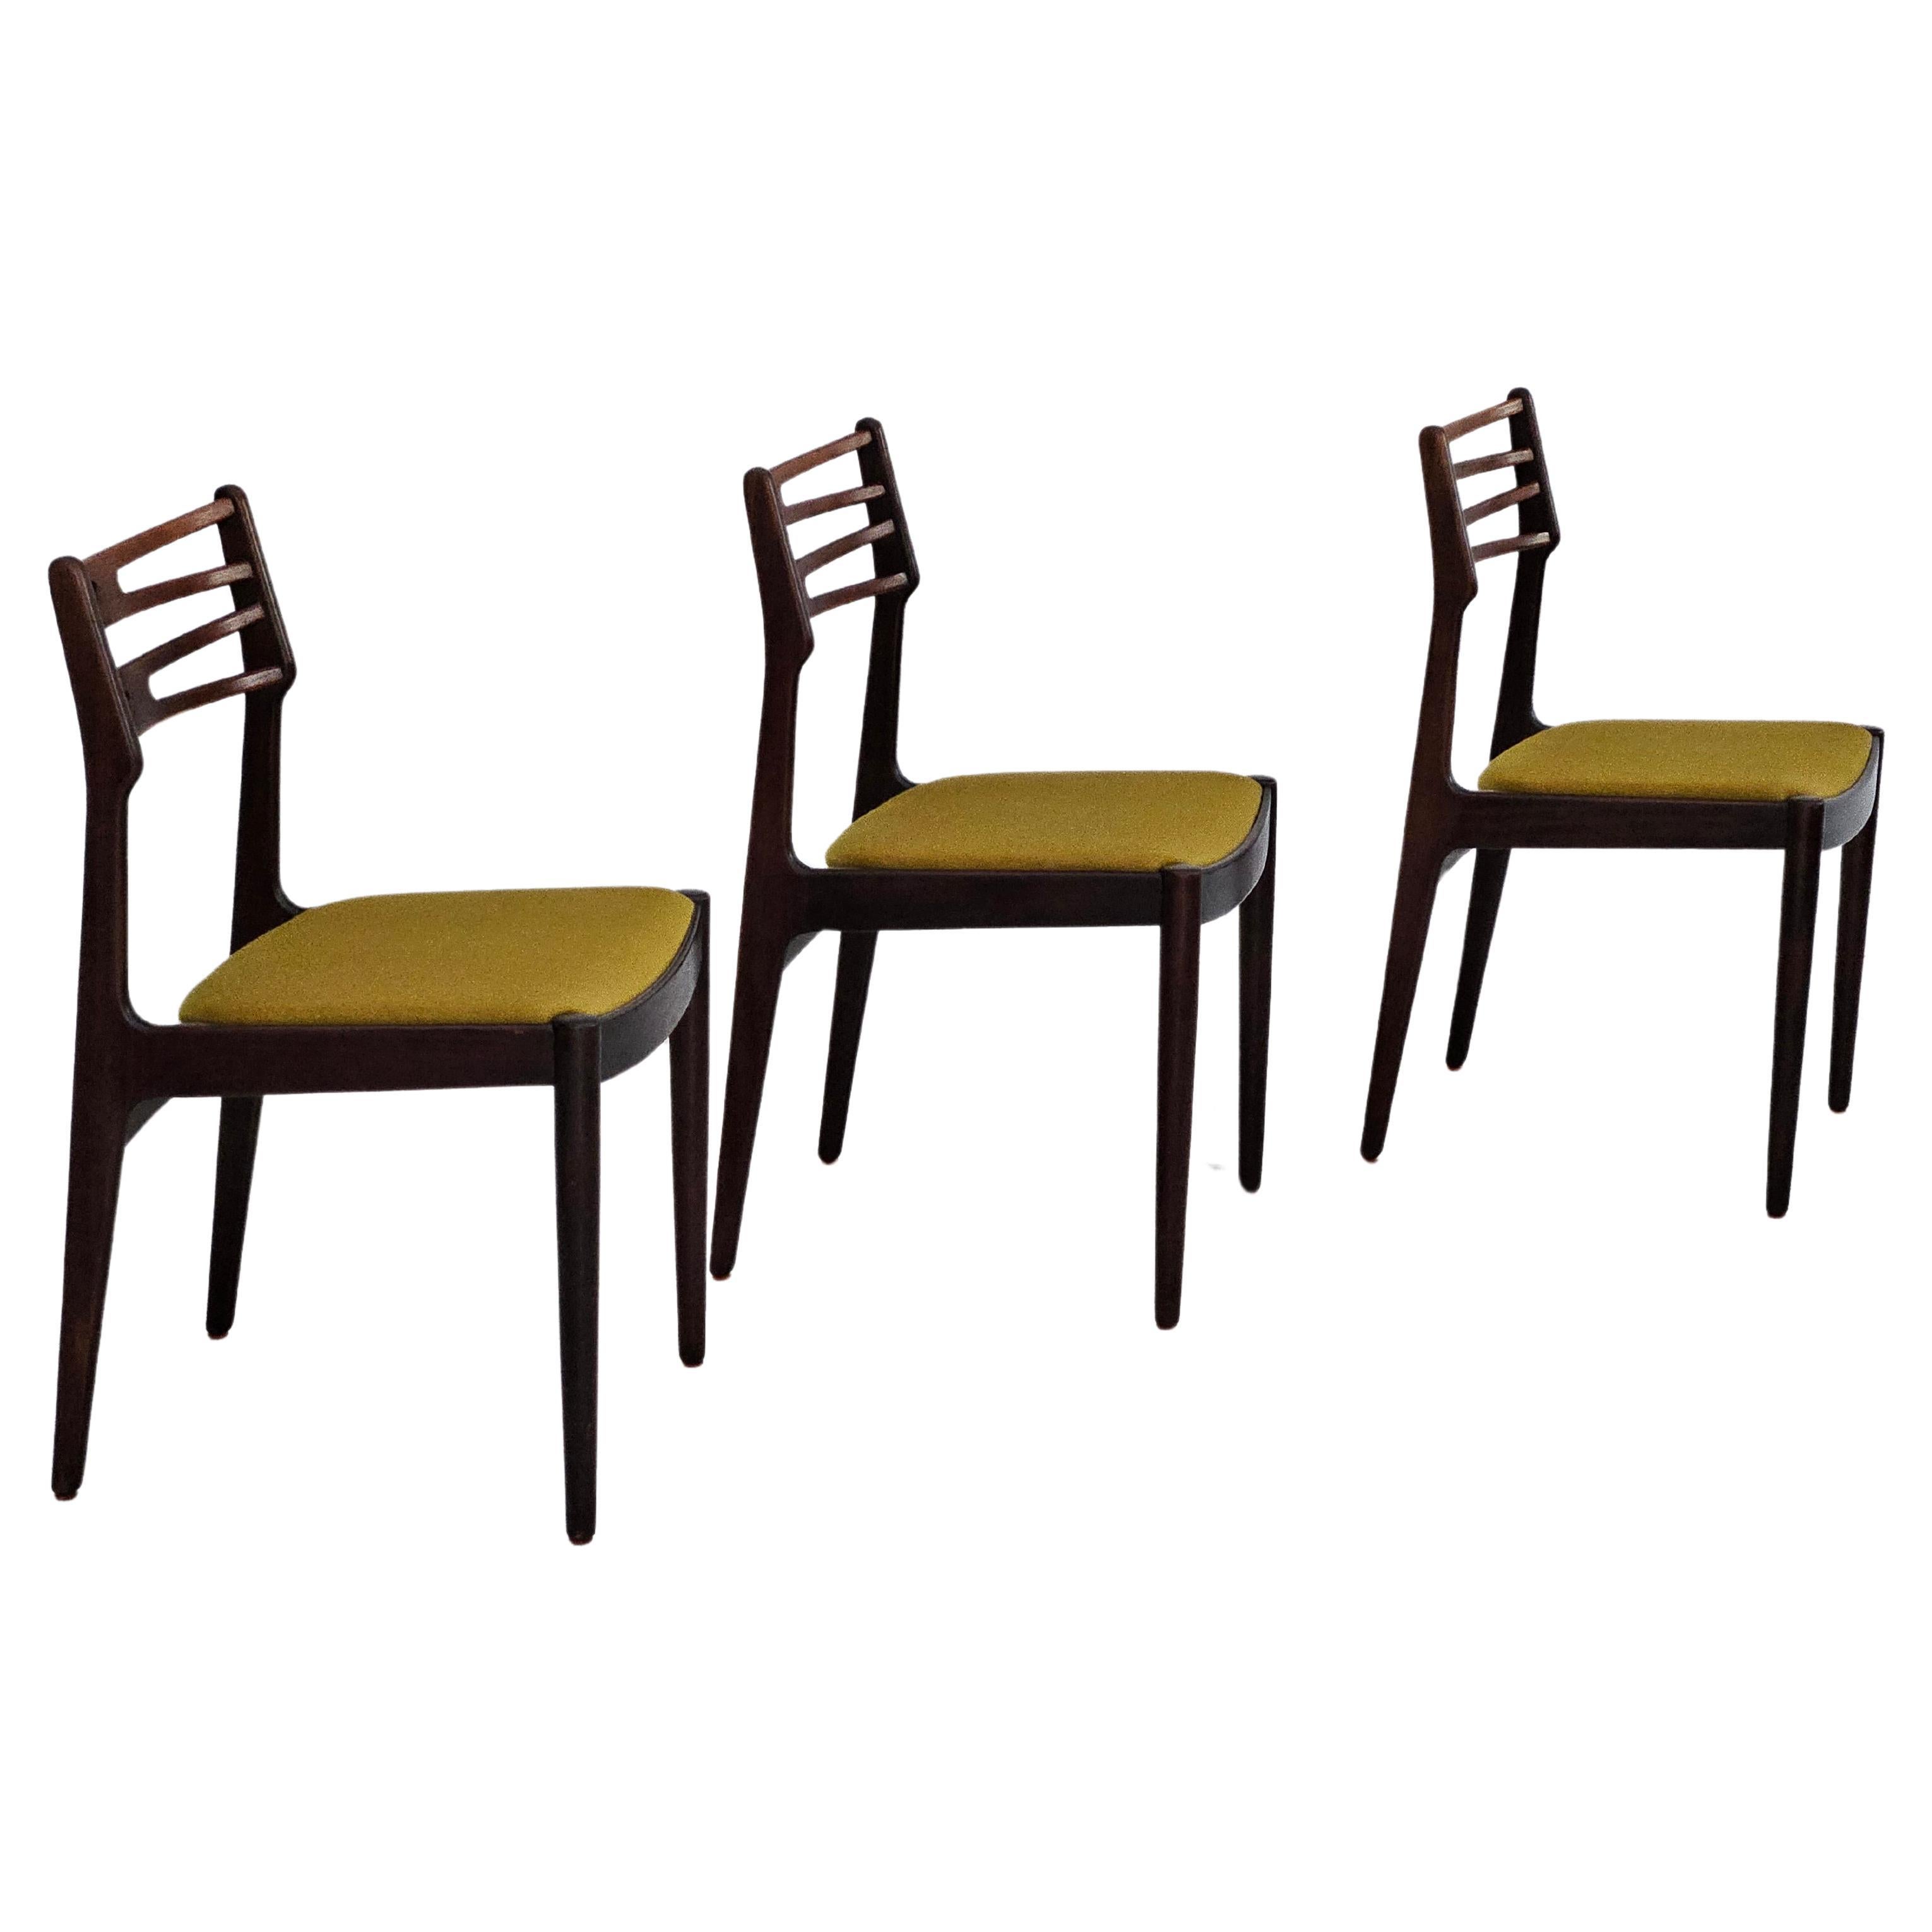 1970s, Danish design by Johannes Andersen, set of 3 dining chairs model 101. For Sale